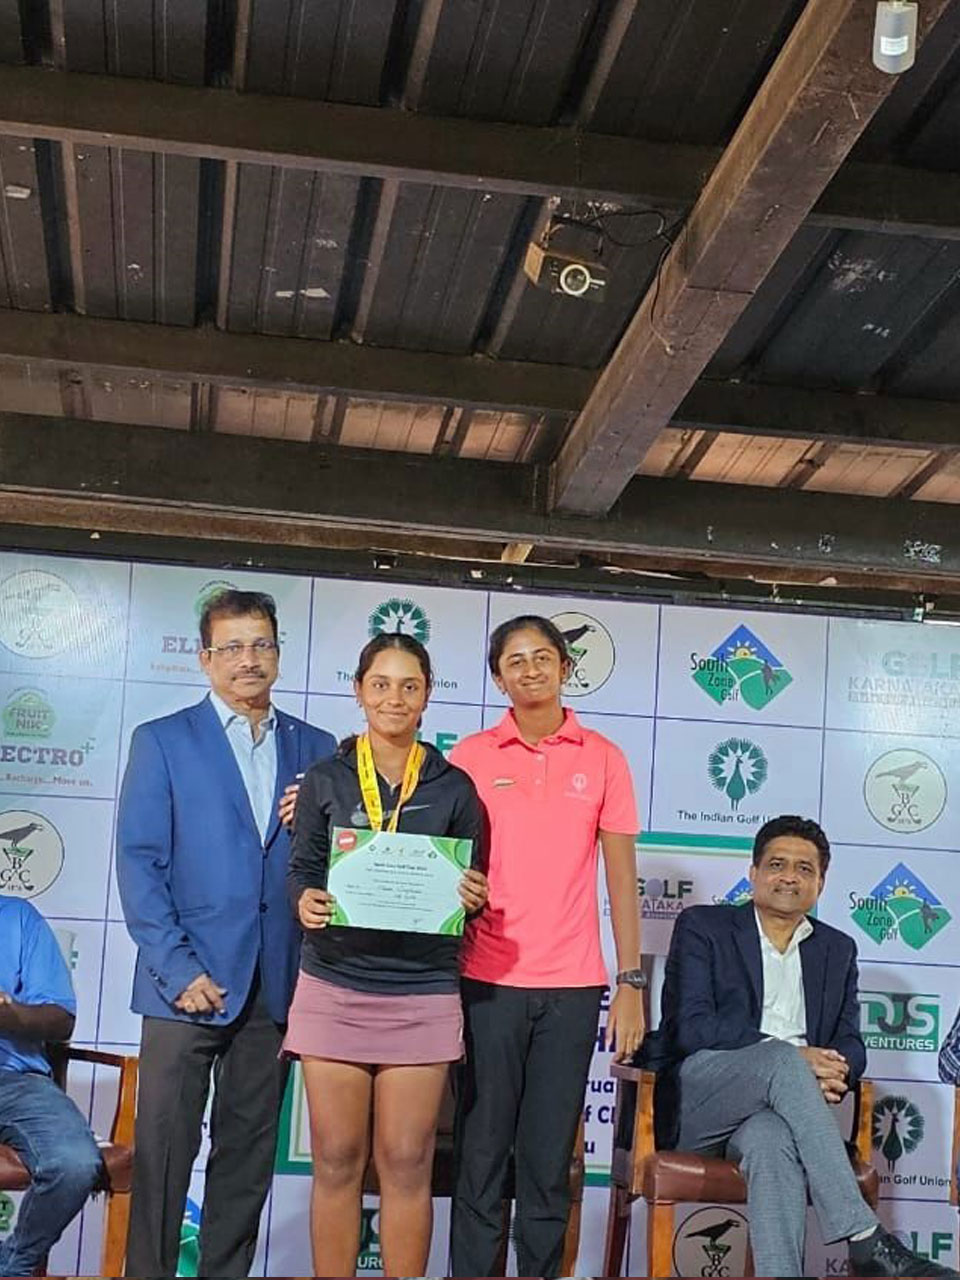 Manvi Singhania won the 'A' Girls category at the IGU South Zone Golf Championship held at Bangalore Golf Club with scores of 74 and 70.
